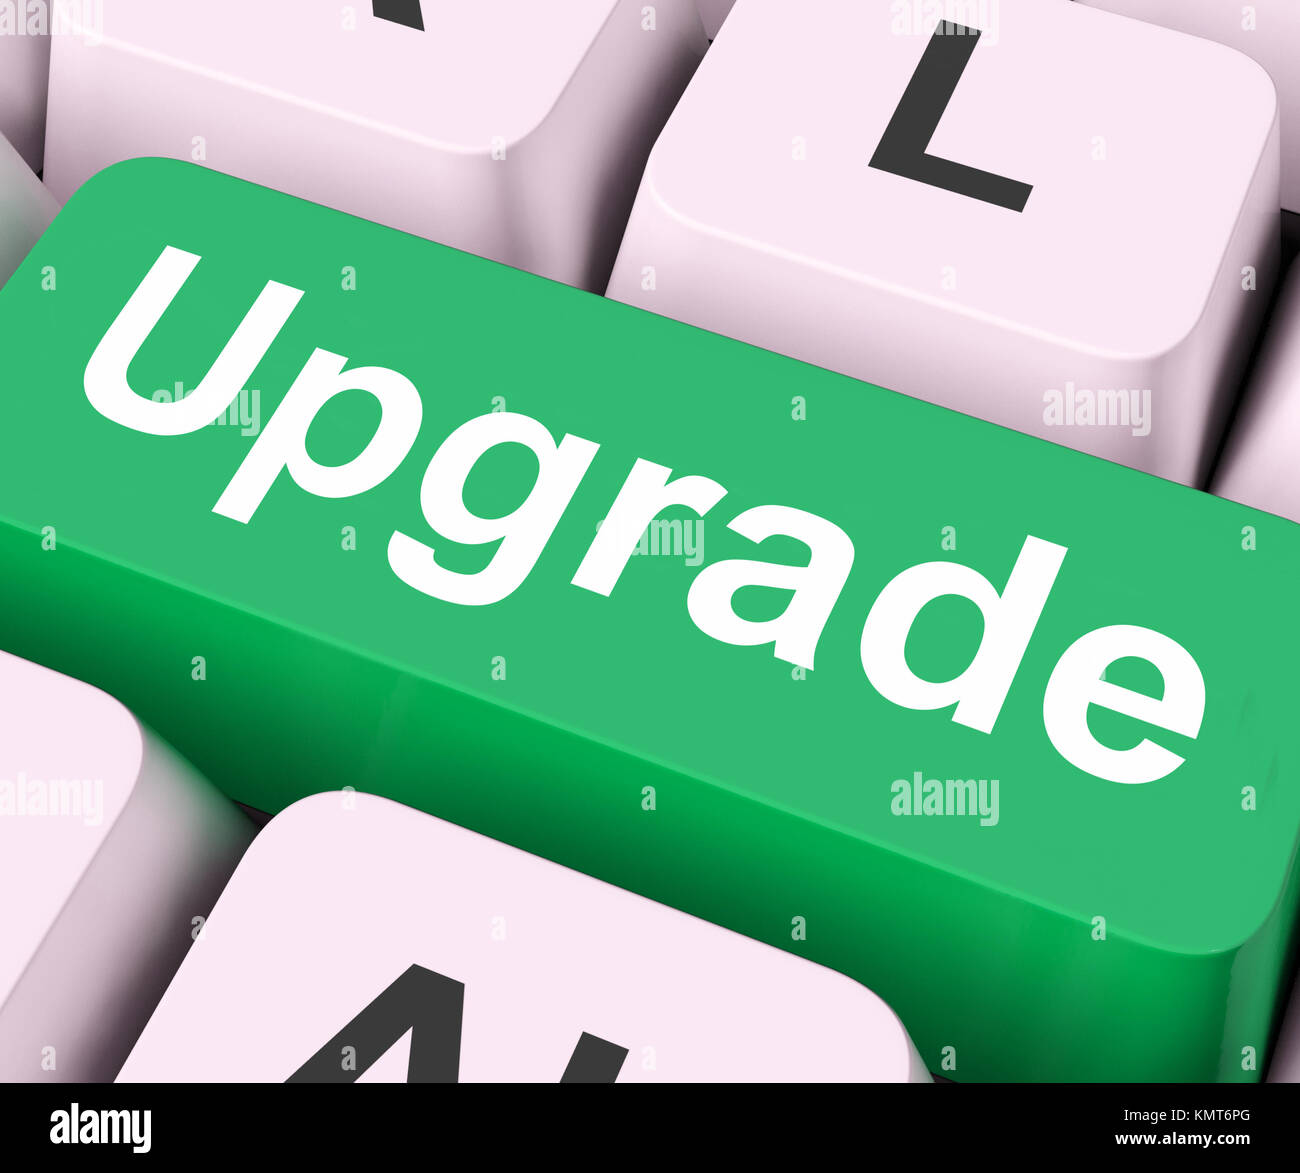 Upgrade Key On Keyboard Meaning Improve Better Or Update Stock Photo